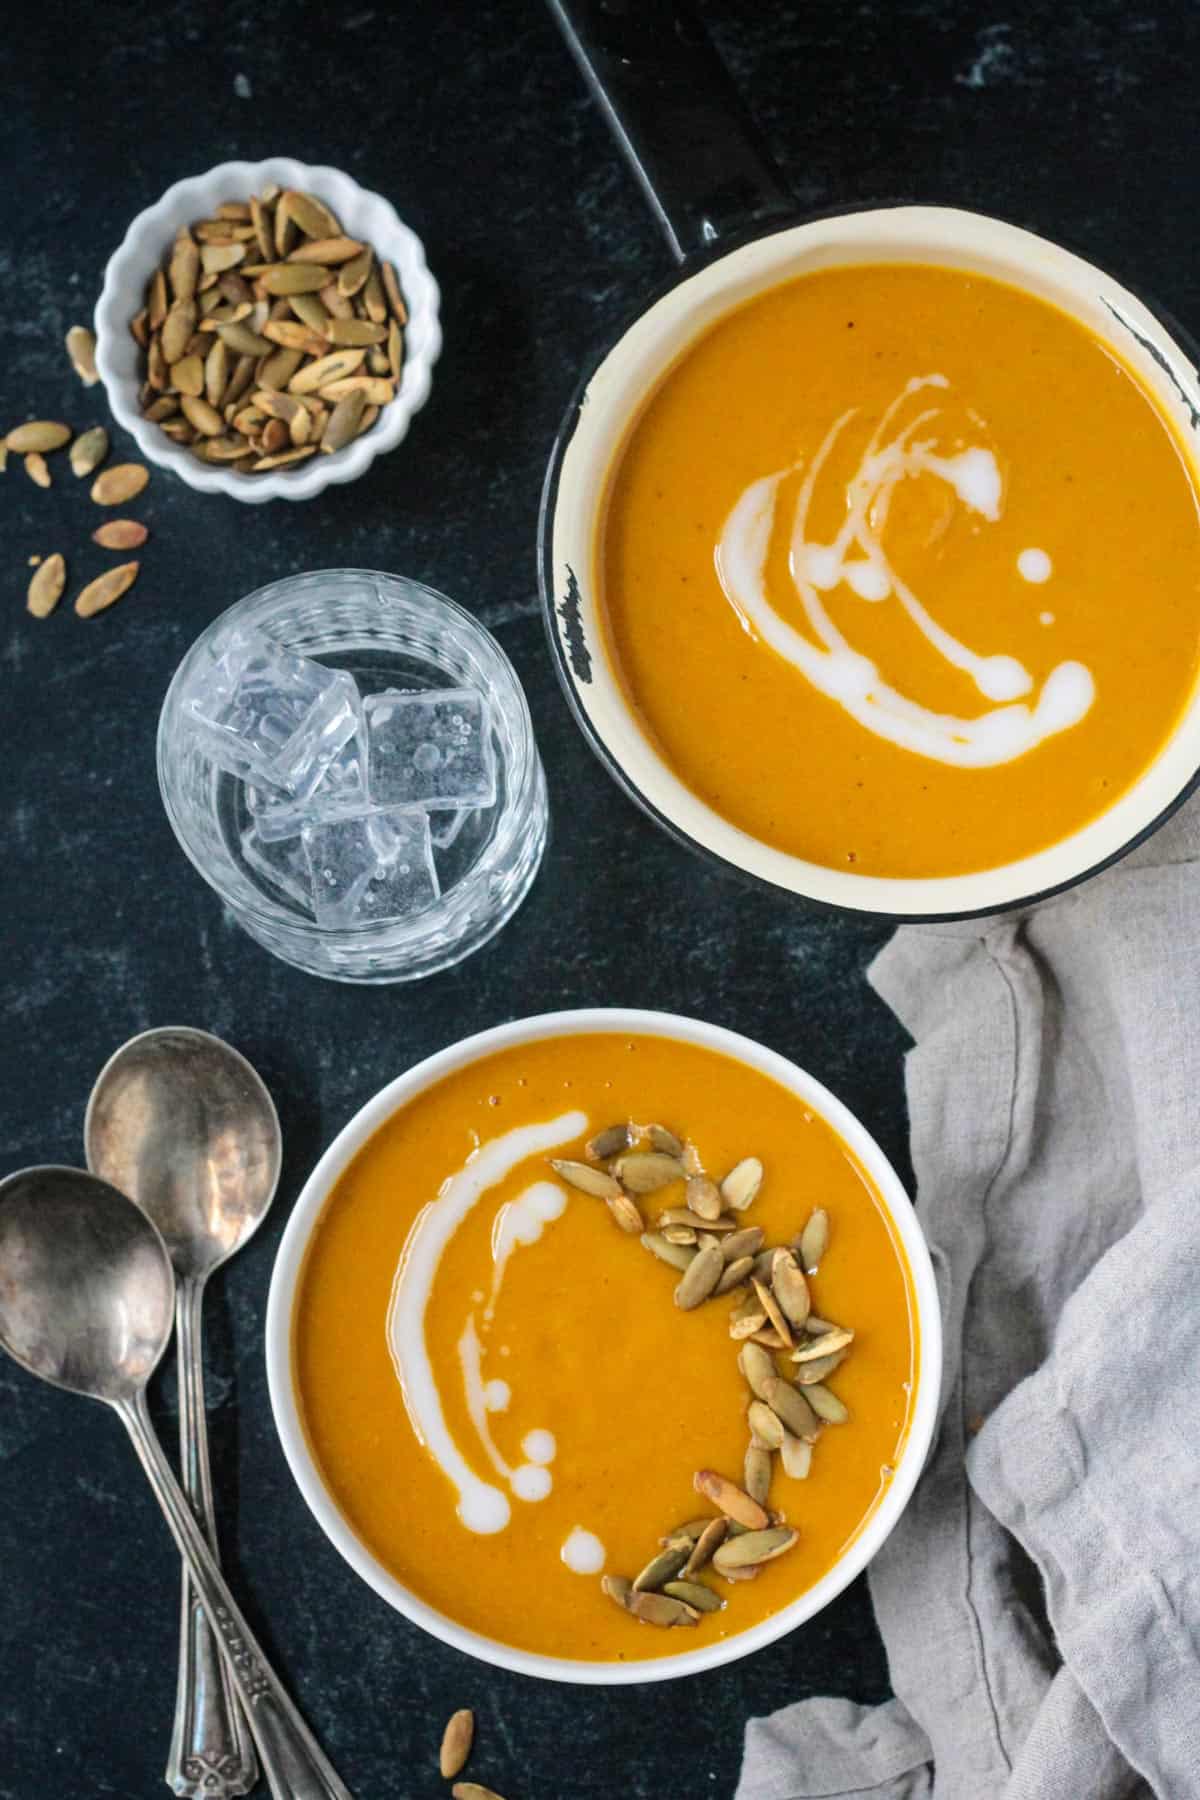 Two bowls of soup next to a glass of water and a small bowl of pumpkin seeds.